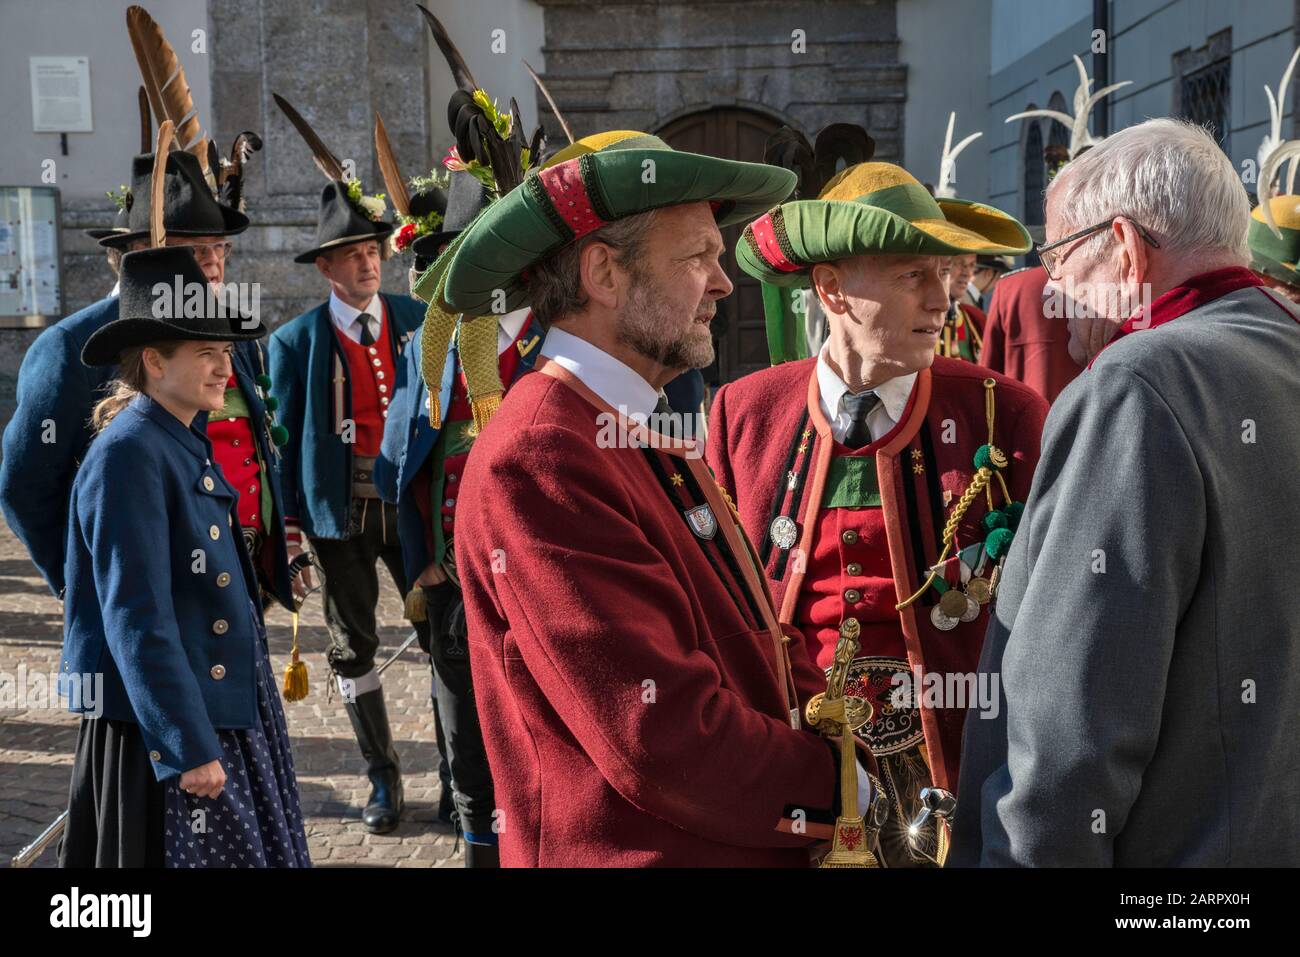 People wearing traditional Tyrolean clothes, in front of Jesuit Church (Jesuitenkirche) aka University Church, Innsbruck, Tyrol, Austria Stock Photo